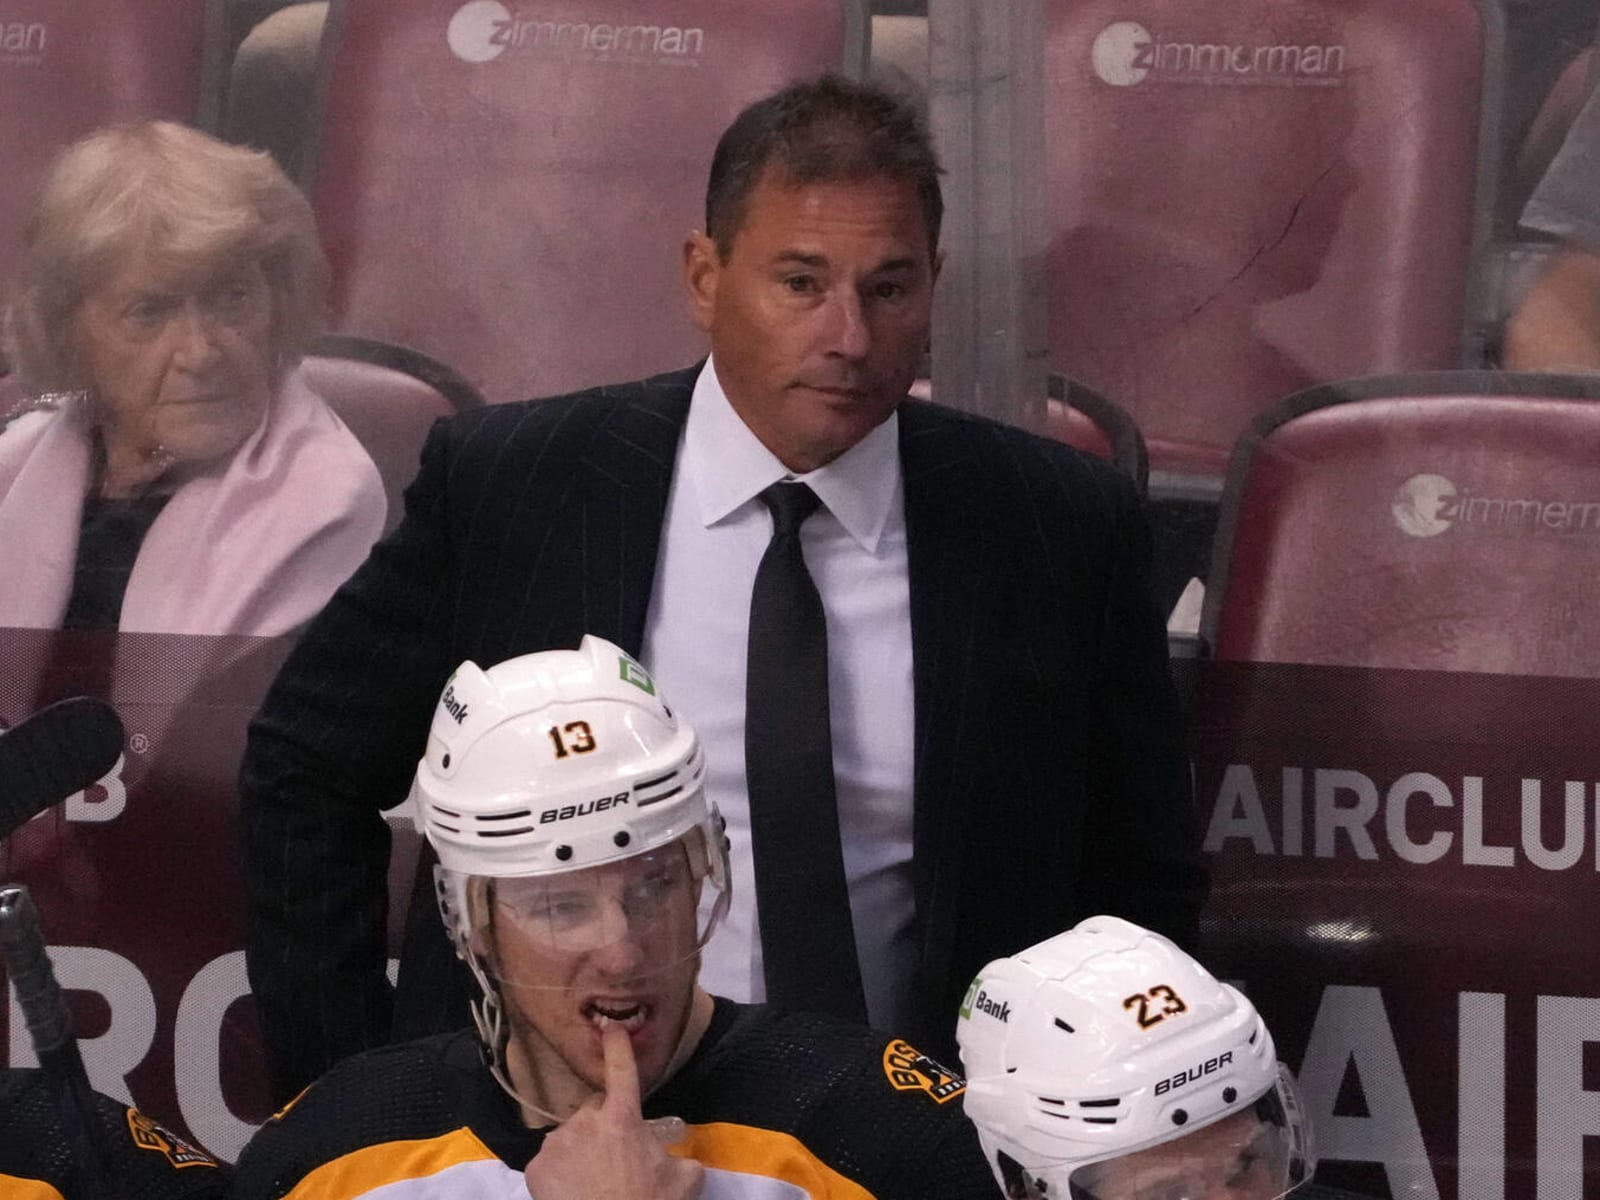 Potential replacements for Bruce Cassidy as Bruins' head coach